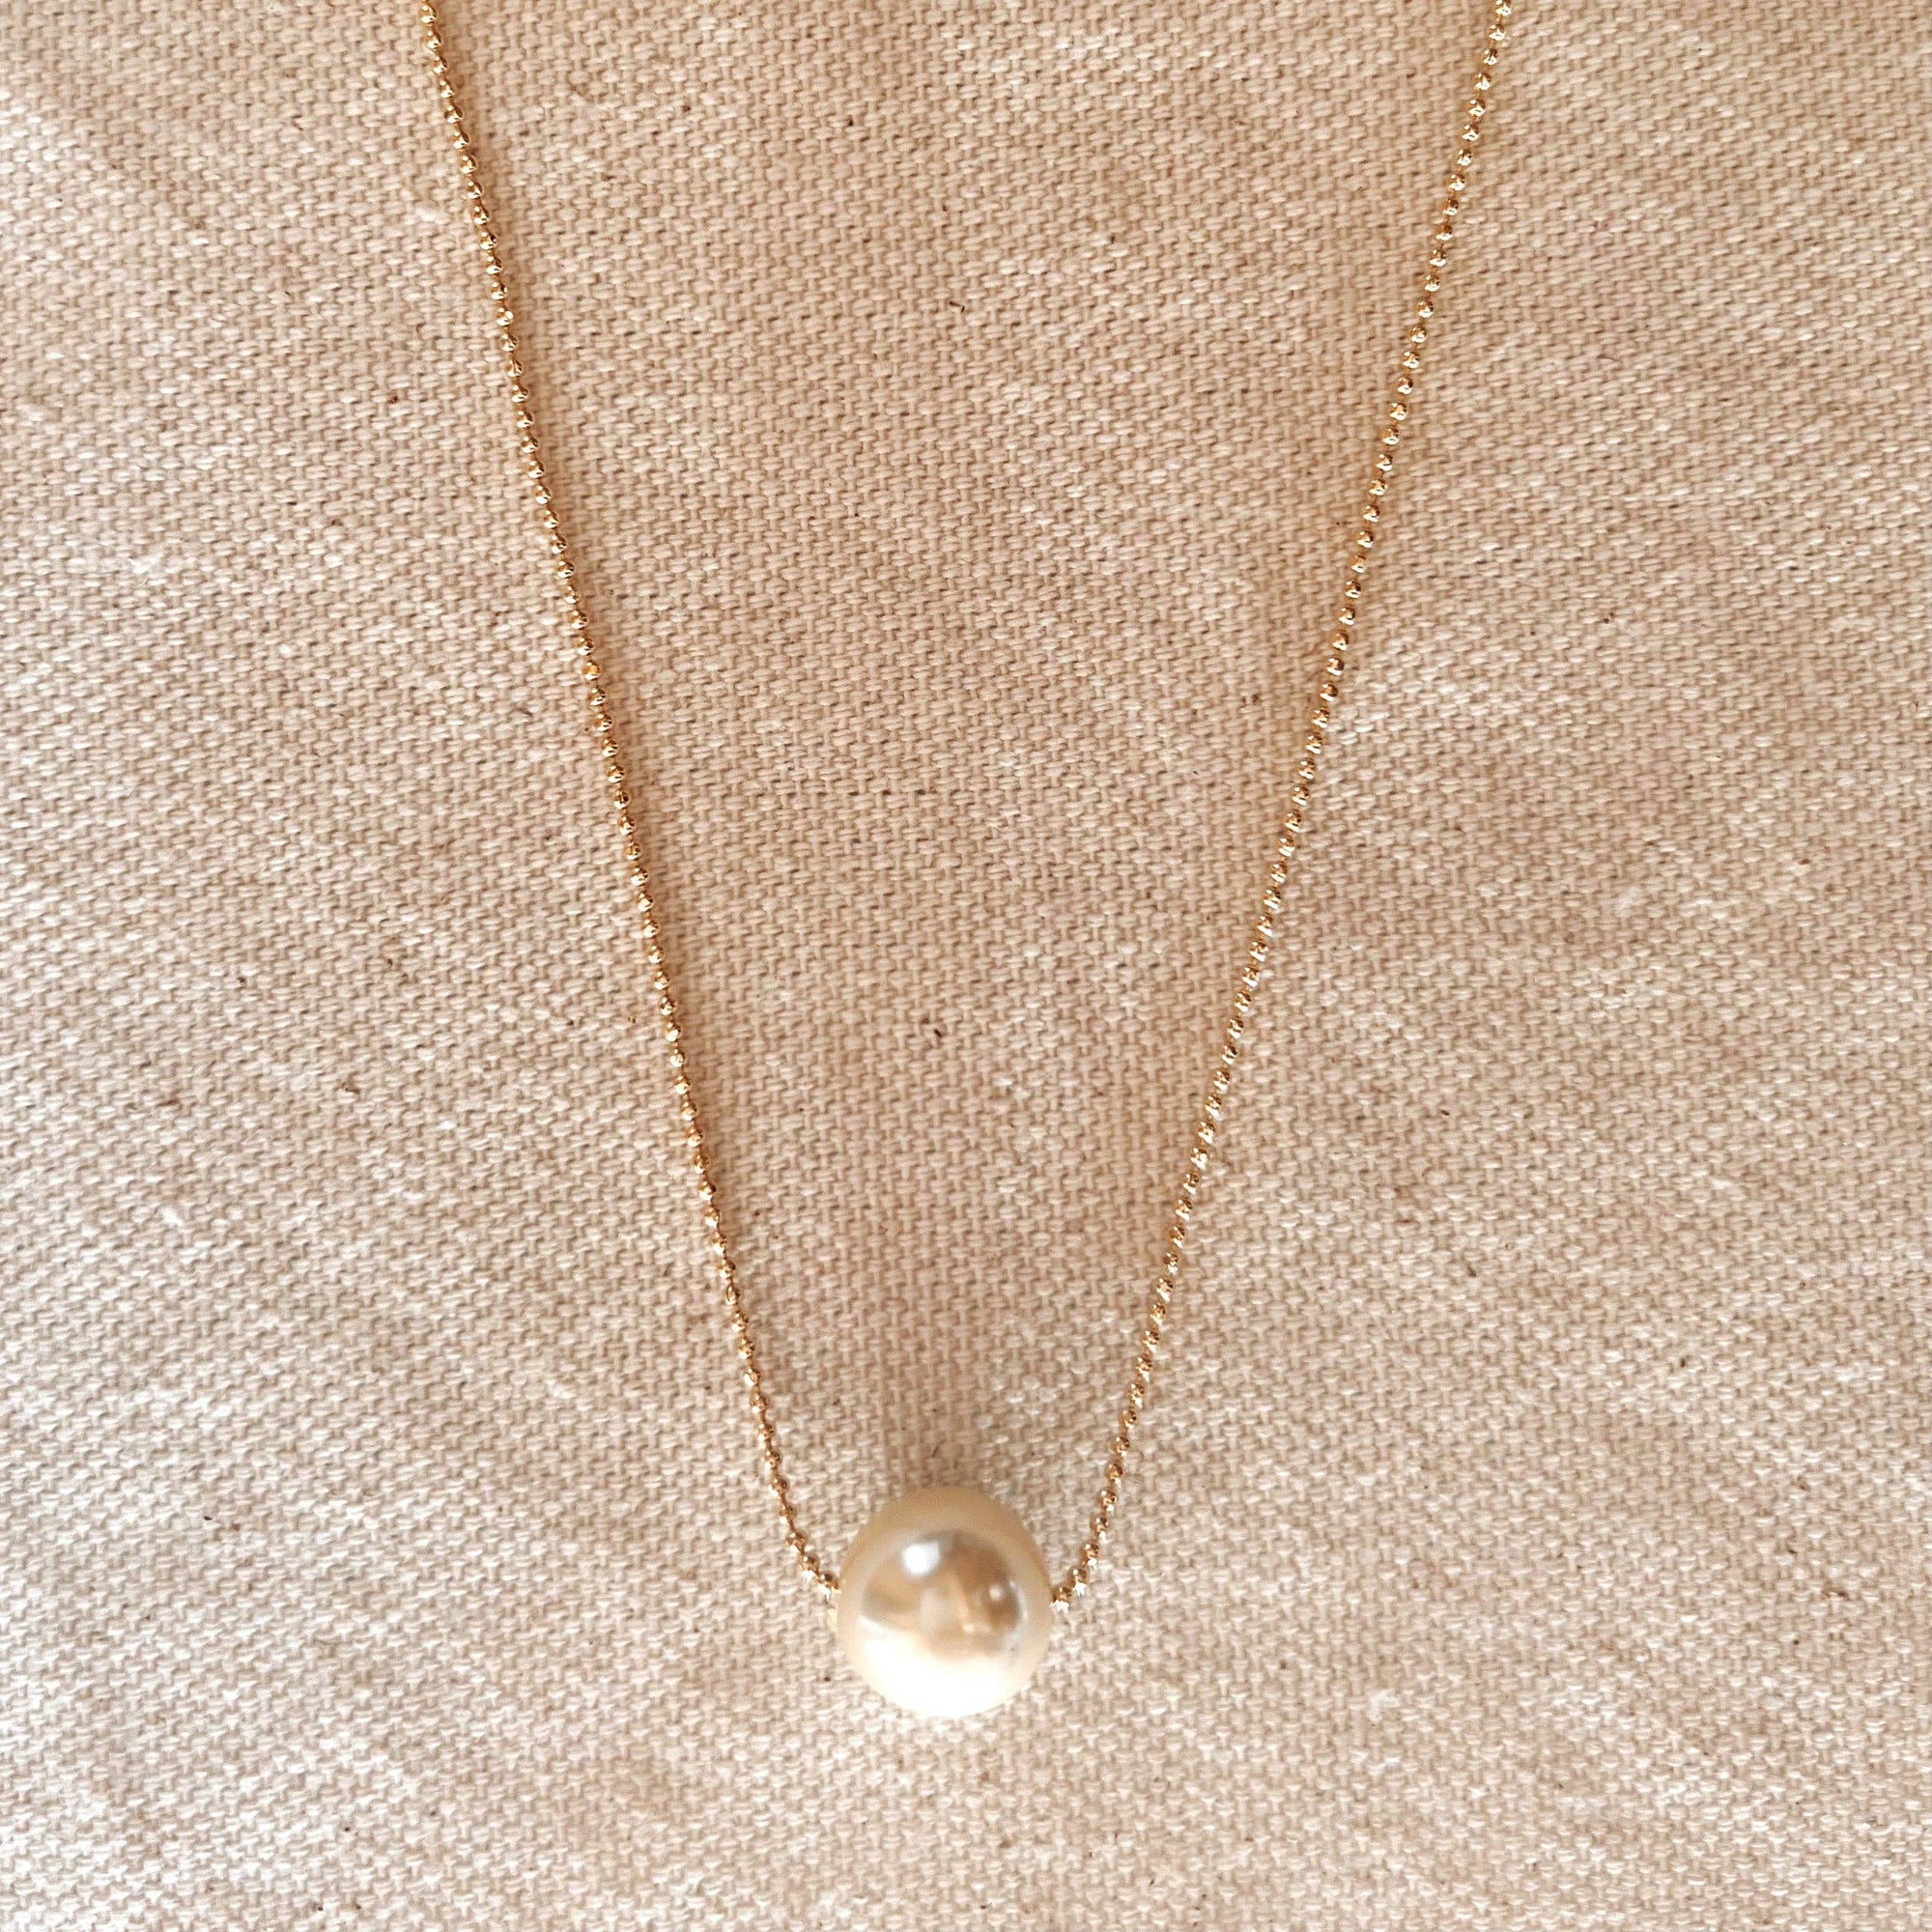 Solitaire Pearl Necklace, 18k Gold Filled